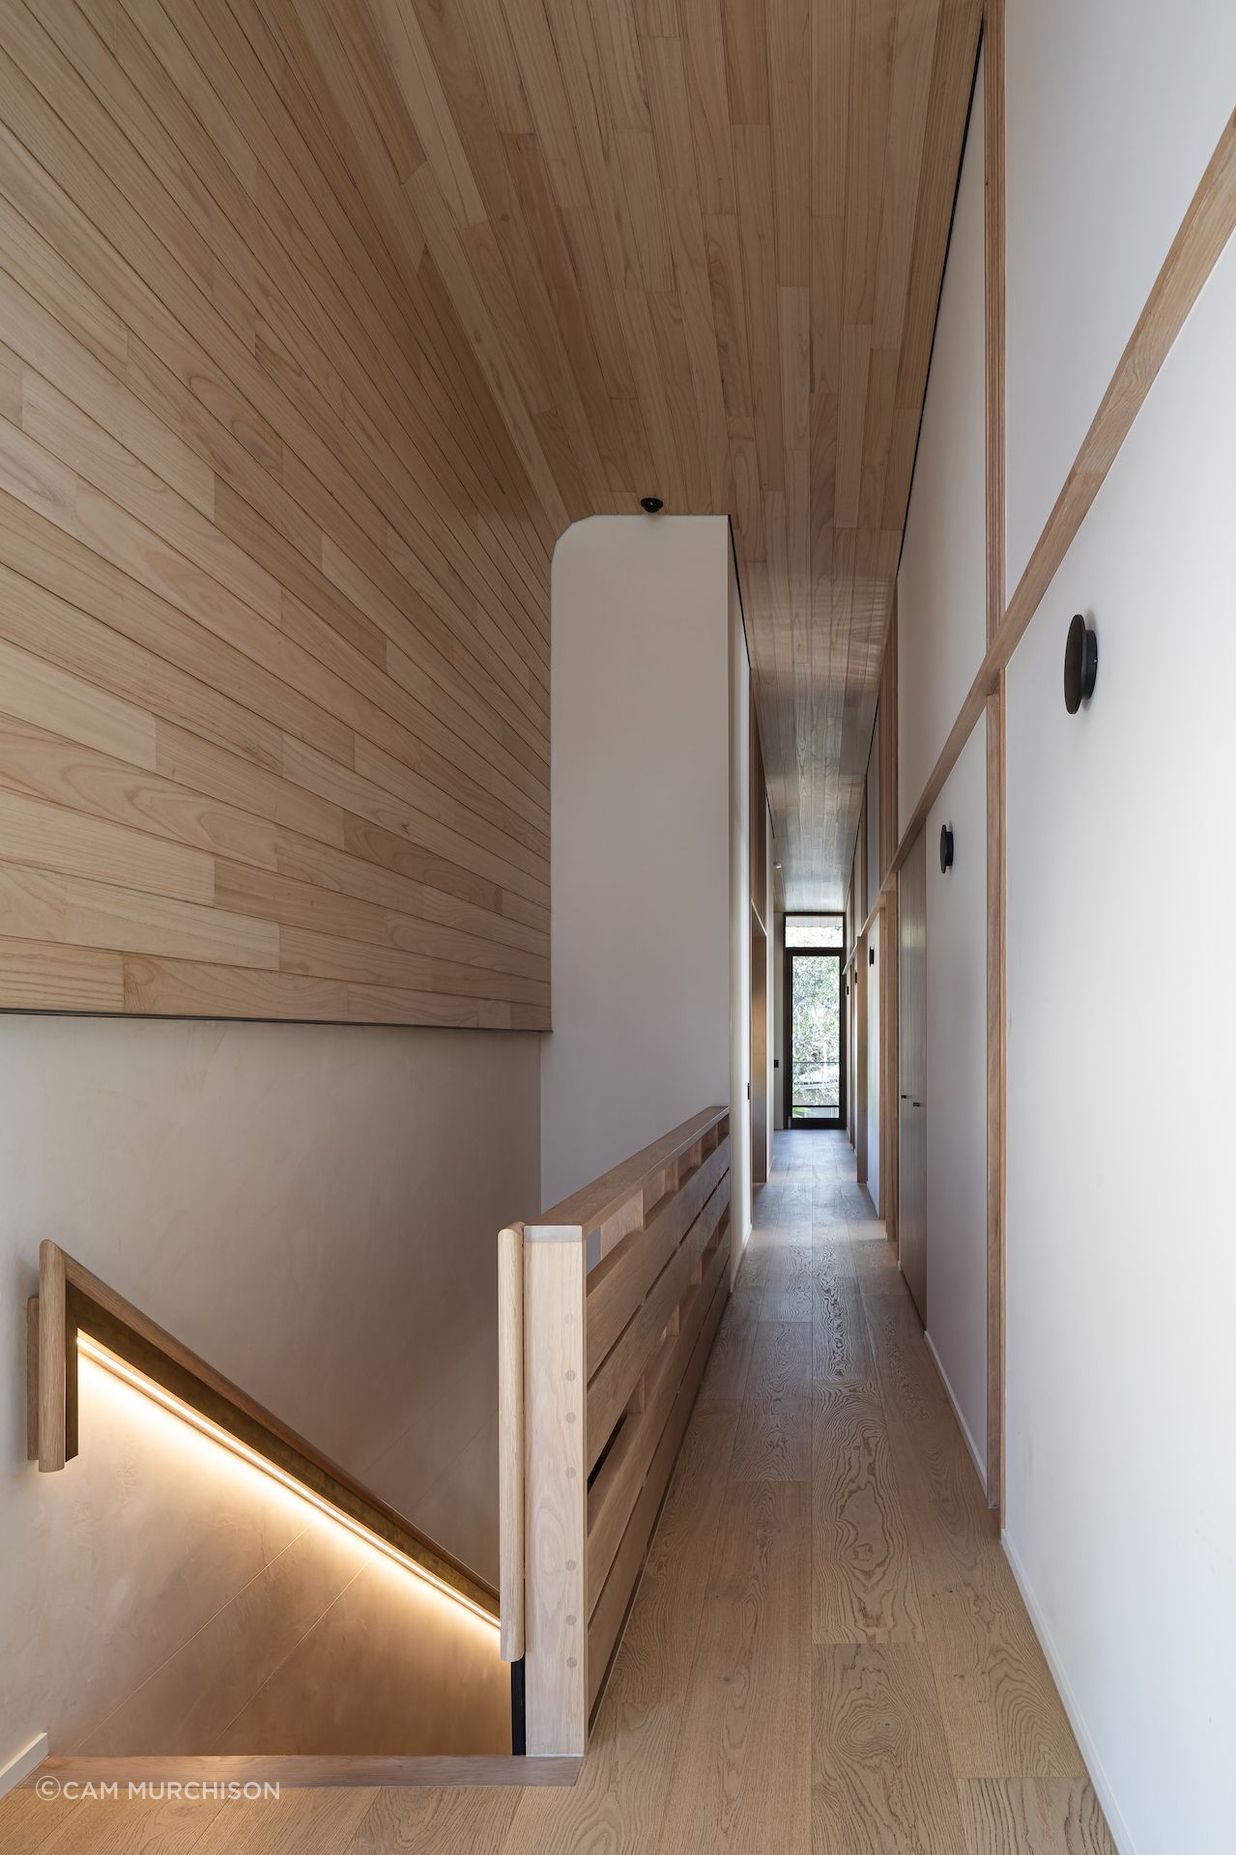 130-Shiplap-Satin-Natural-Robe-Street-Valdal-Projects-Sparks-Architects-Cam-Murchison-Photography-3.jpg